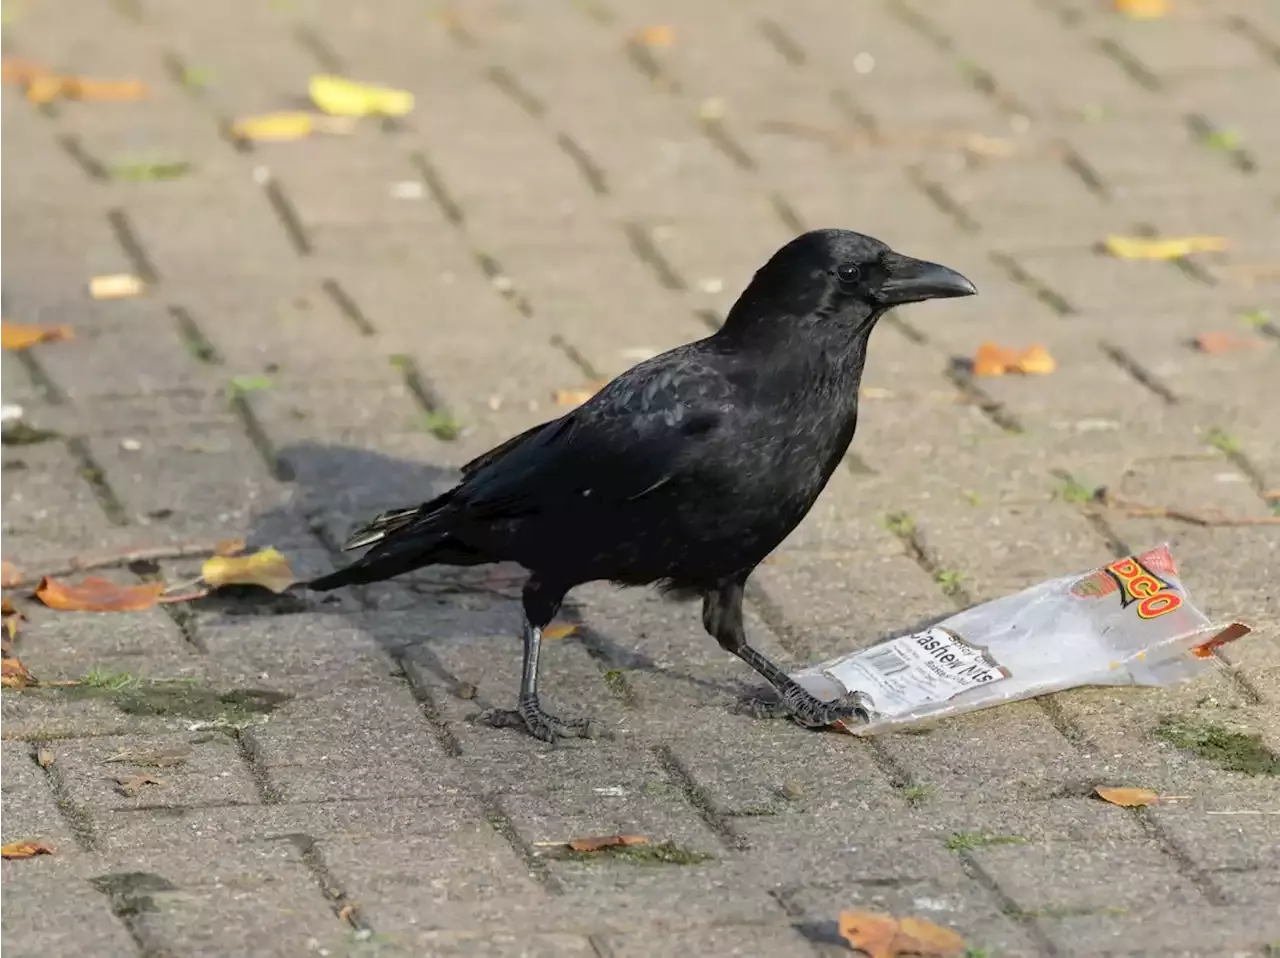 California town mulling using laser after being invaded by crows